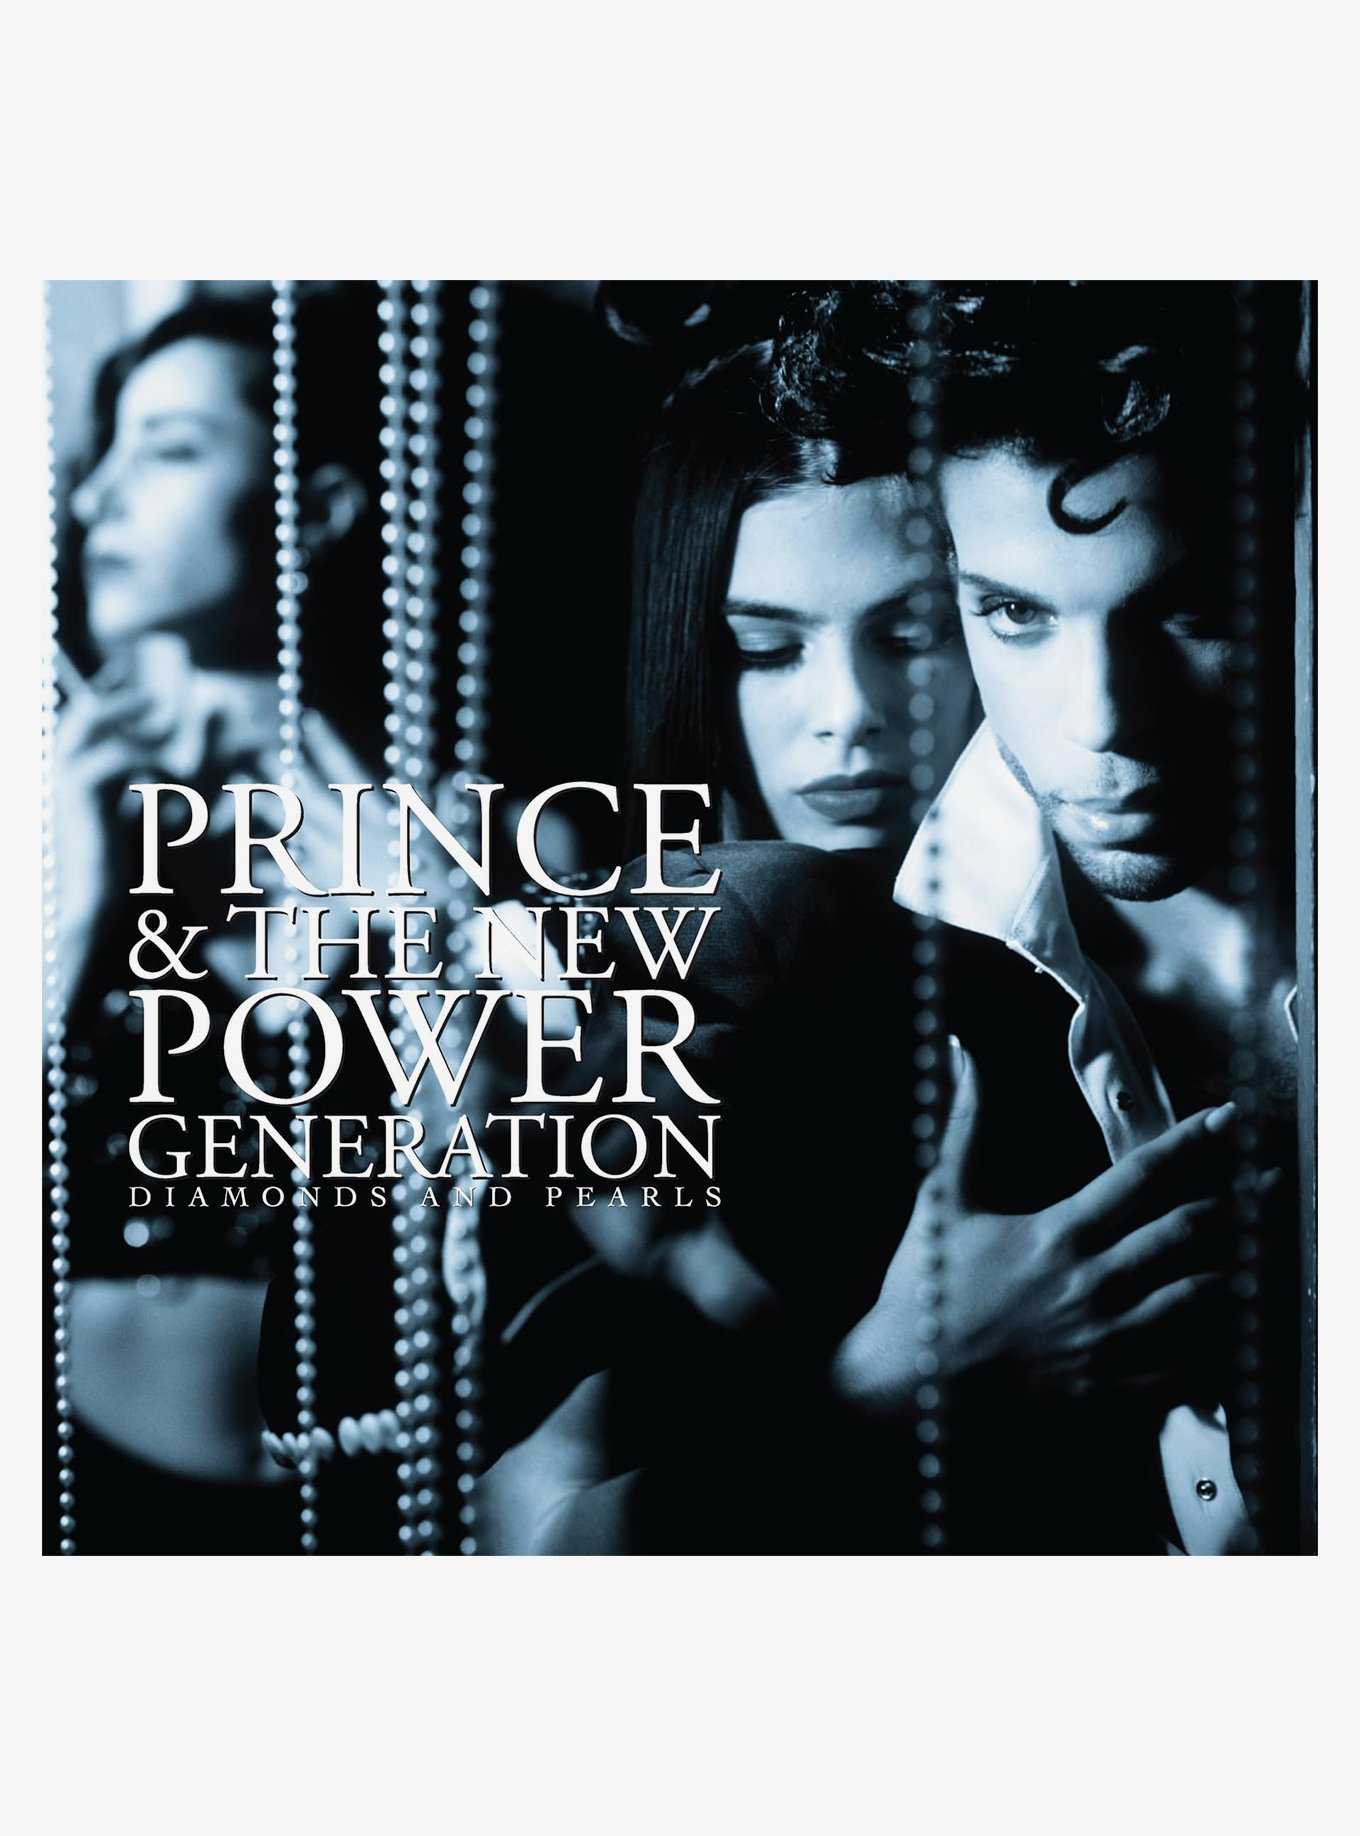 Prince & New Power Generation Diamonds And Pearls Deluxe Vinyl, , hi-res